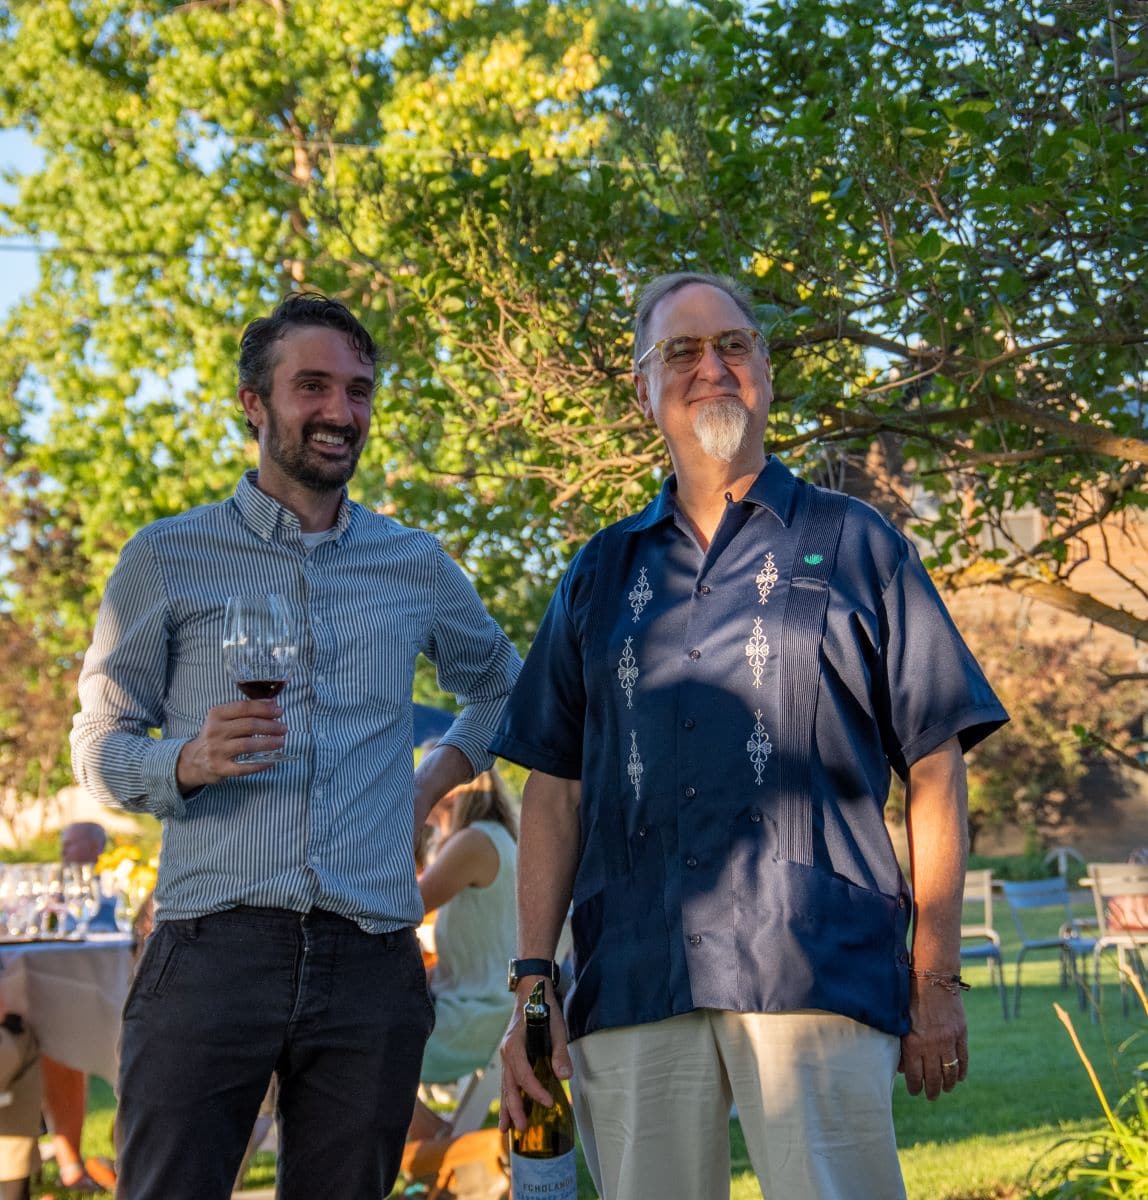 Sager Small, vineyard manager at Woodward Canyon Winery and Doug Frost, co-owner of Echolands Winery. Celebrate Syrah Walla Walla Valley Wine.,